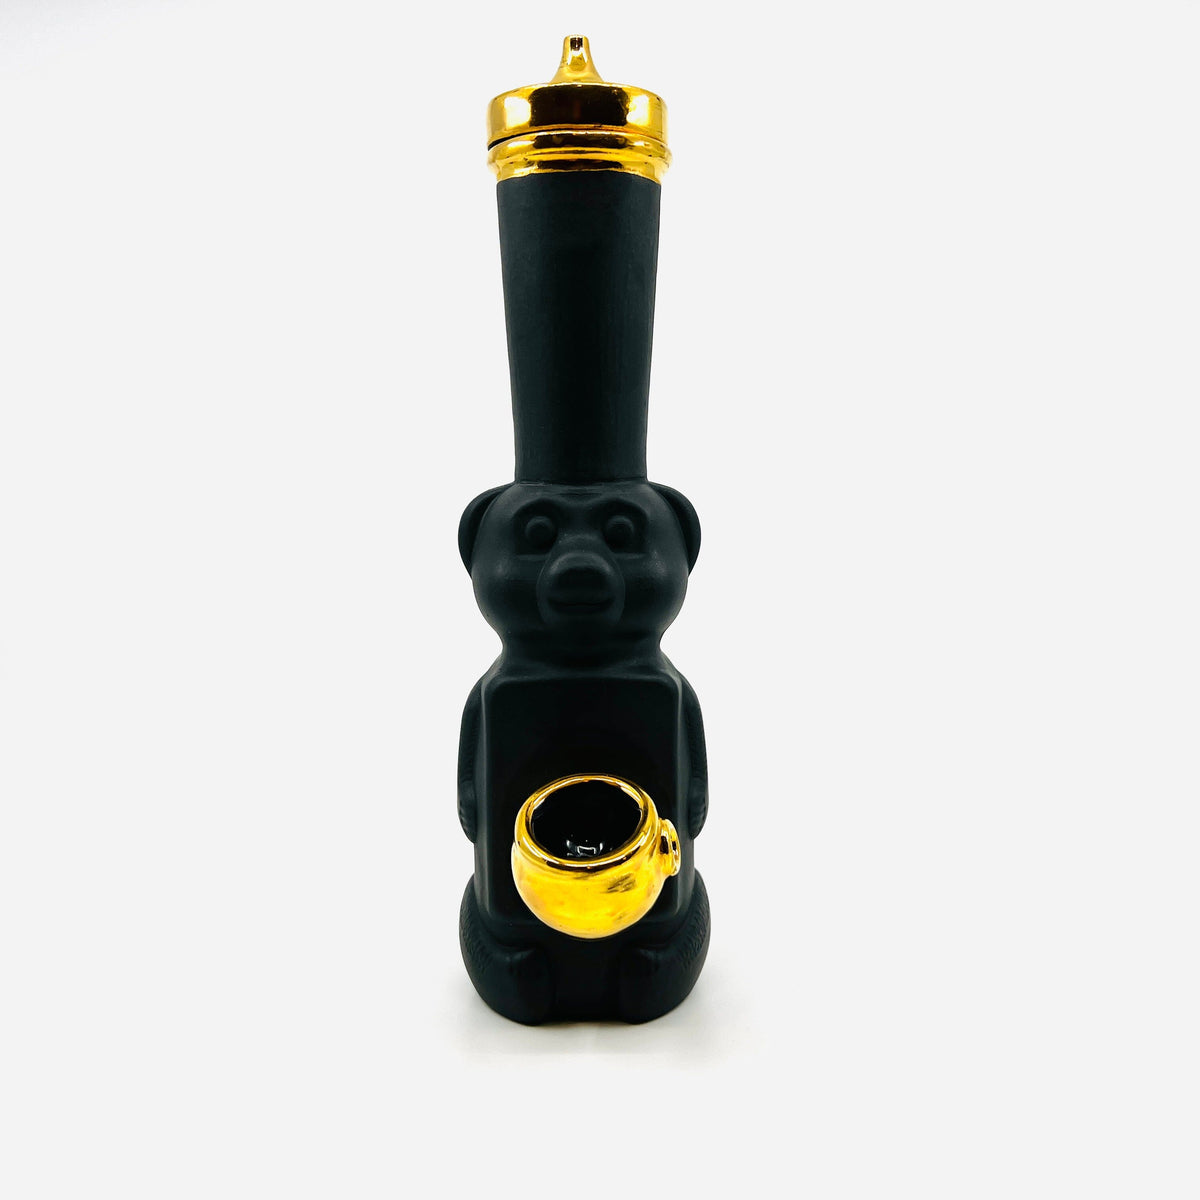 22k Gold Honey Bear Pipe Decor Candy Relics 